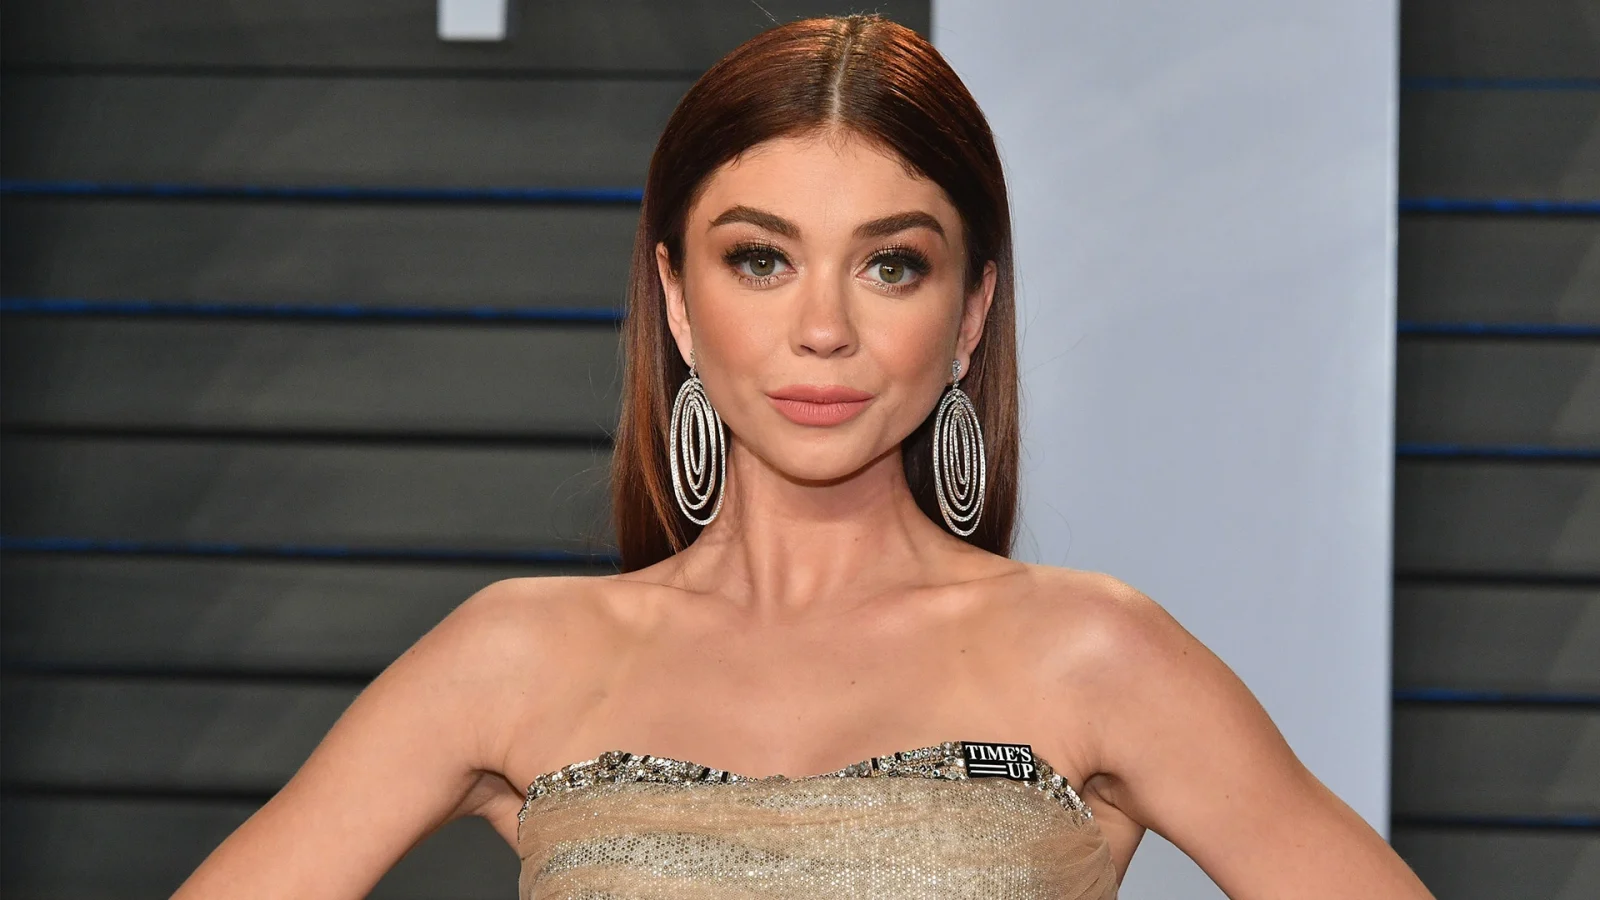 Sarah Hyland Biography Height Weight Age Movies Husband Family Salary Net Worth Facts More